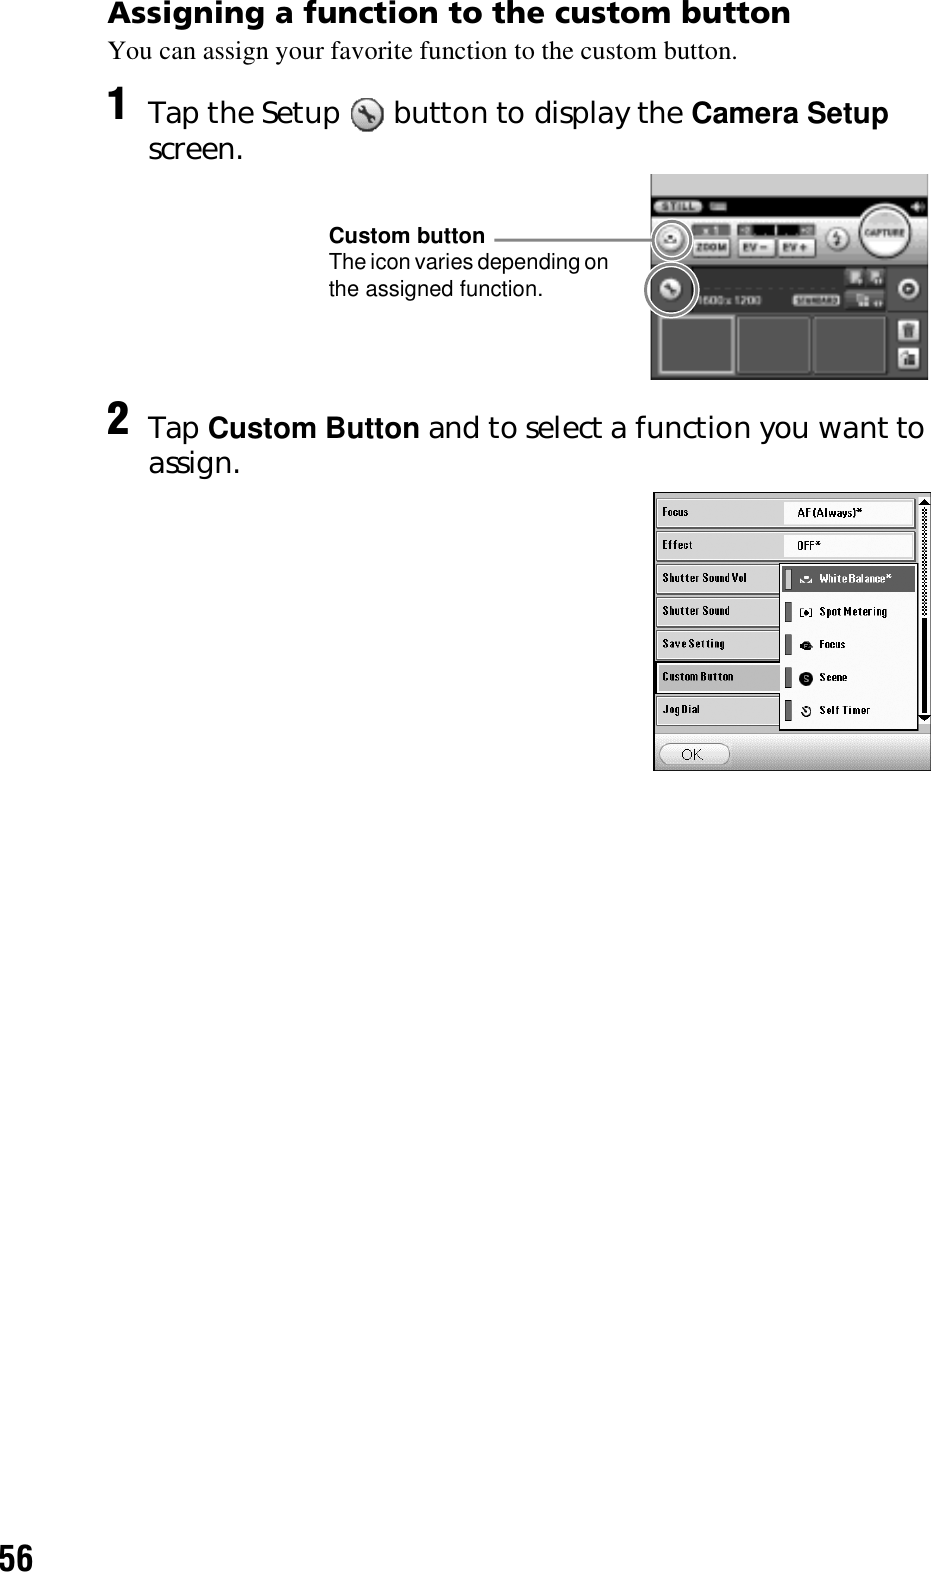 56Assigning a function to the custom buttonYou can assign your favorite function to the custom button.1Tap the Setup   button to display the Camera Setup screen.2Tap Custom Button and to select a function you want to assign.Custom buttonThe icon varies depending on the assigned function.